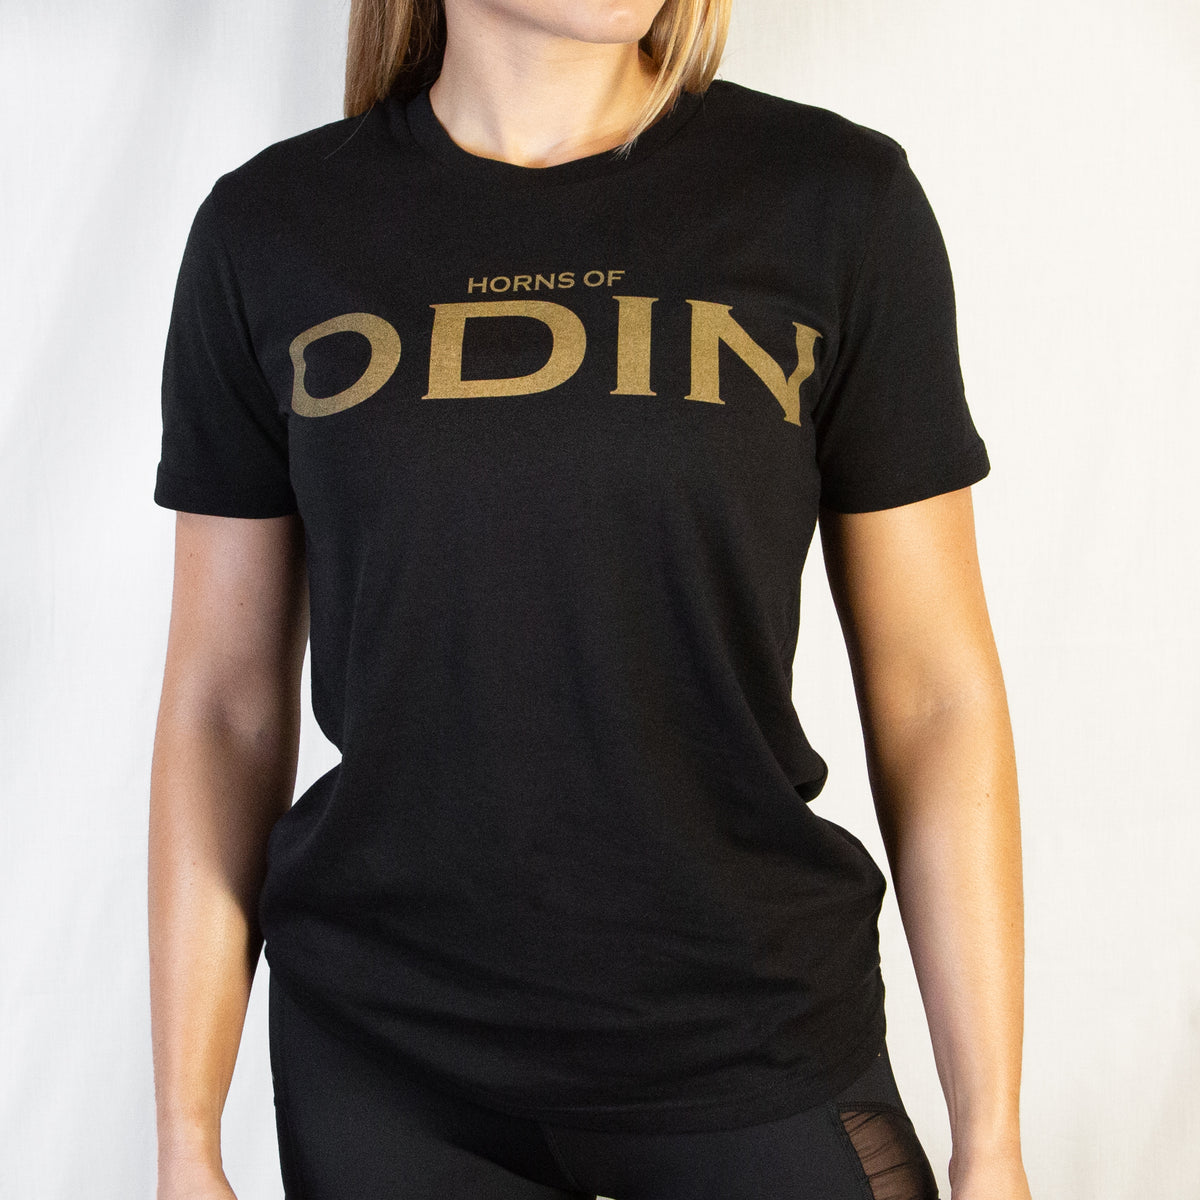 Black unisex T-shirt with "Horns of Odin" in Gold